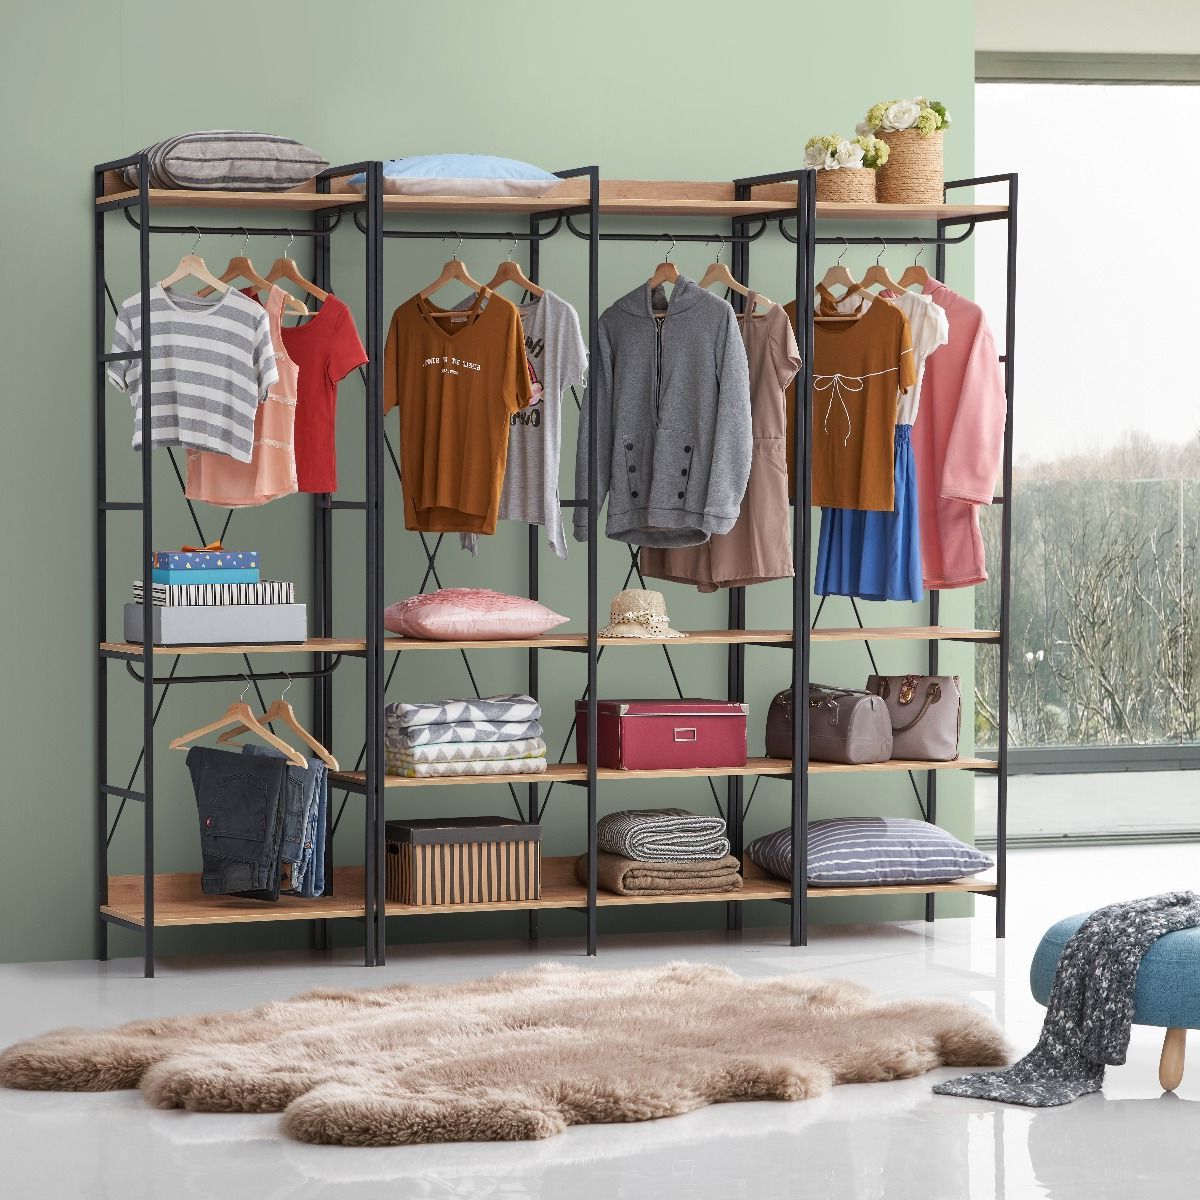 Open Wardrobe With 4 Shelves With Preferred 4 Shelf Closet Wardrobes (View 3 of 10)